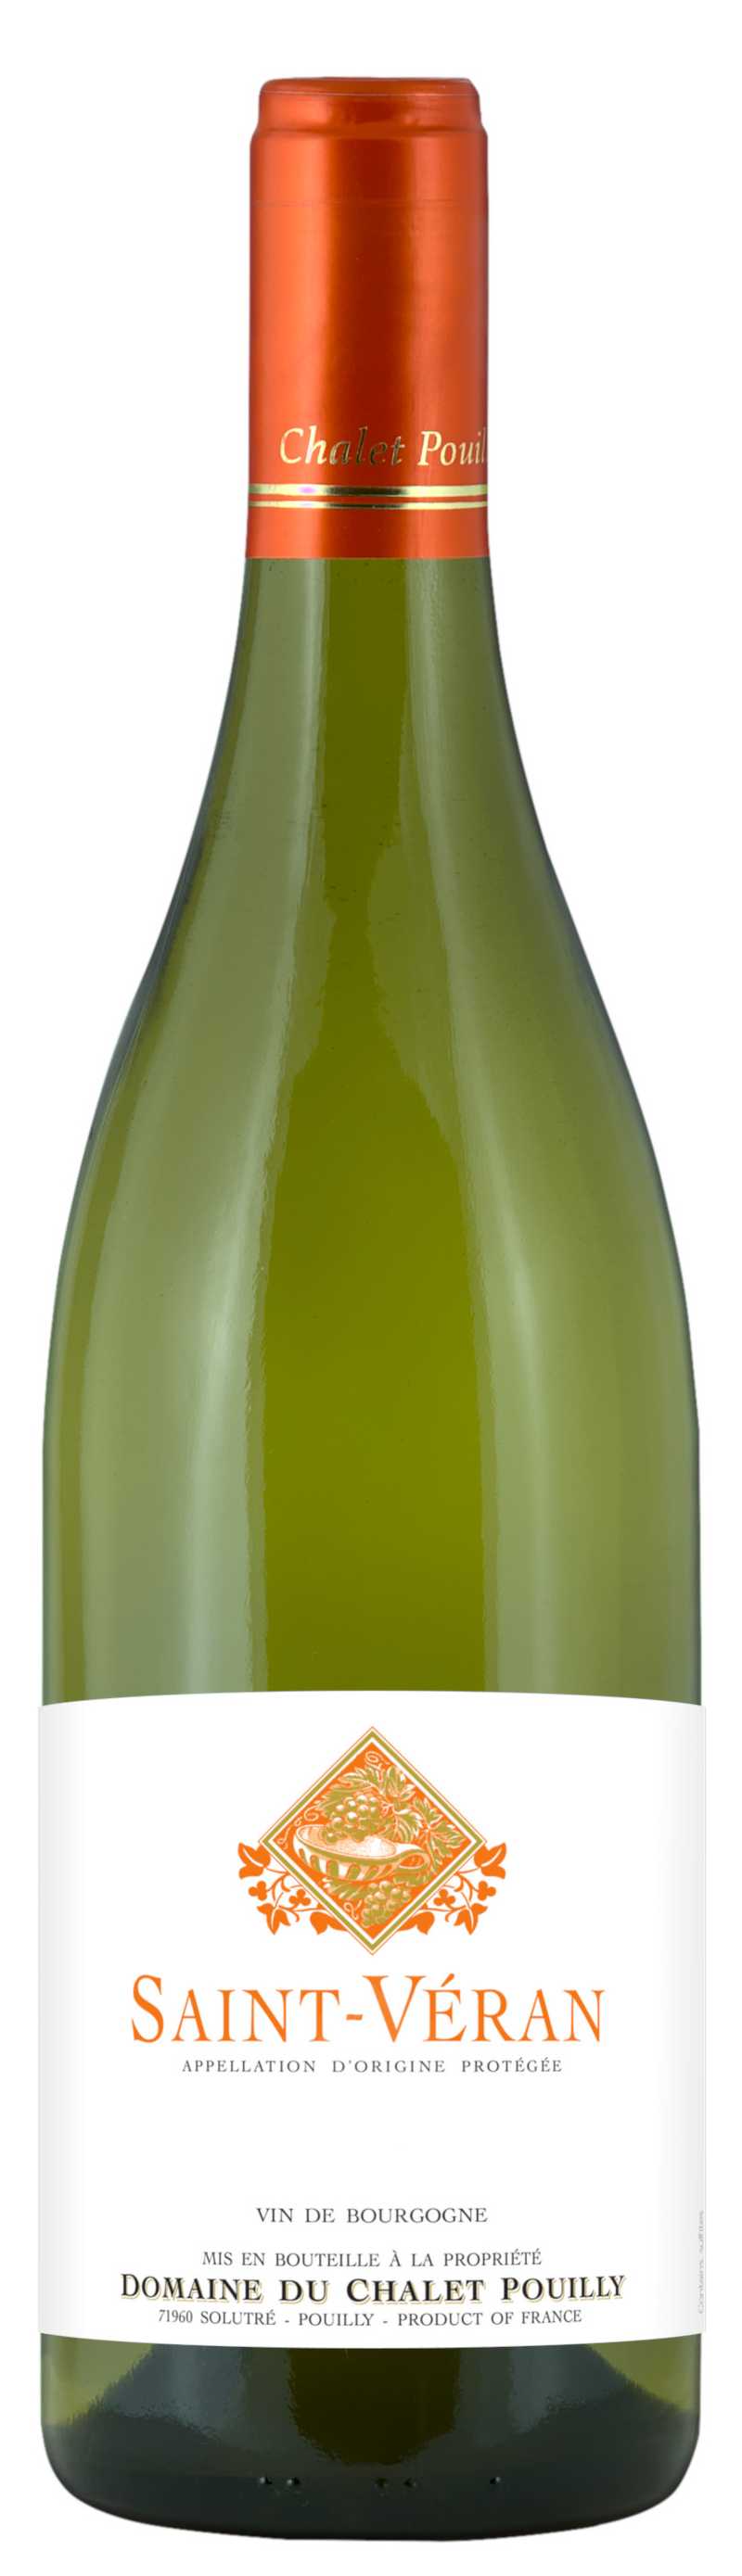 ** TODO Preview. Download file for best image quality. **
 TODO Representation of a bottle of Pouilly-Fuissé of any vintage.